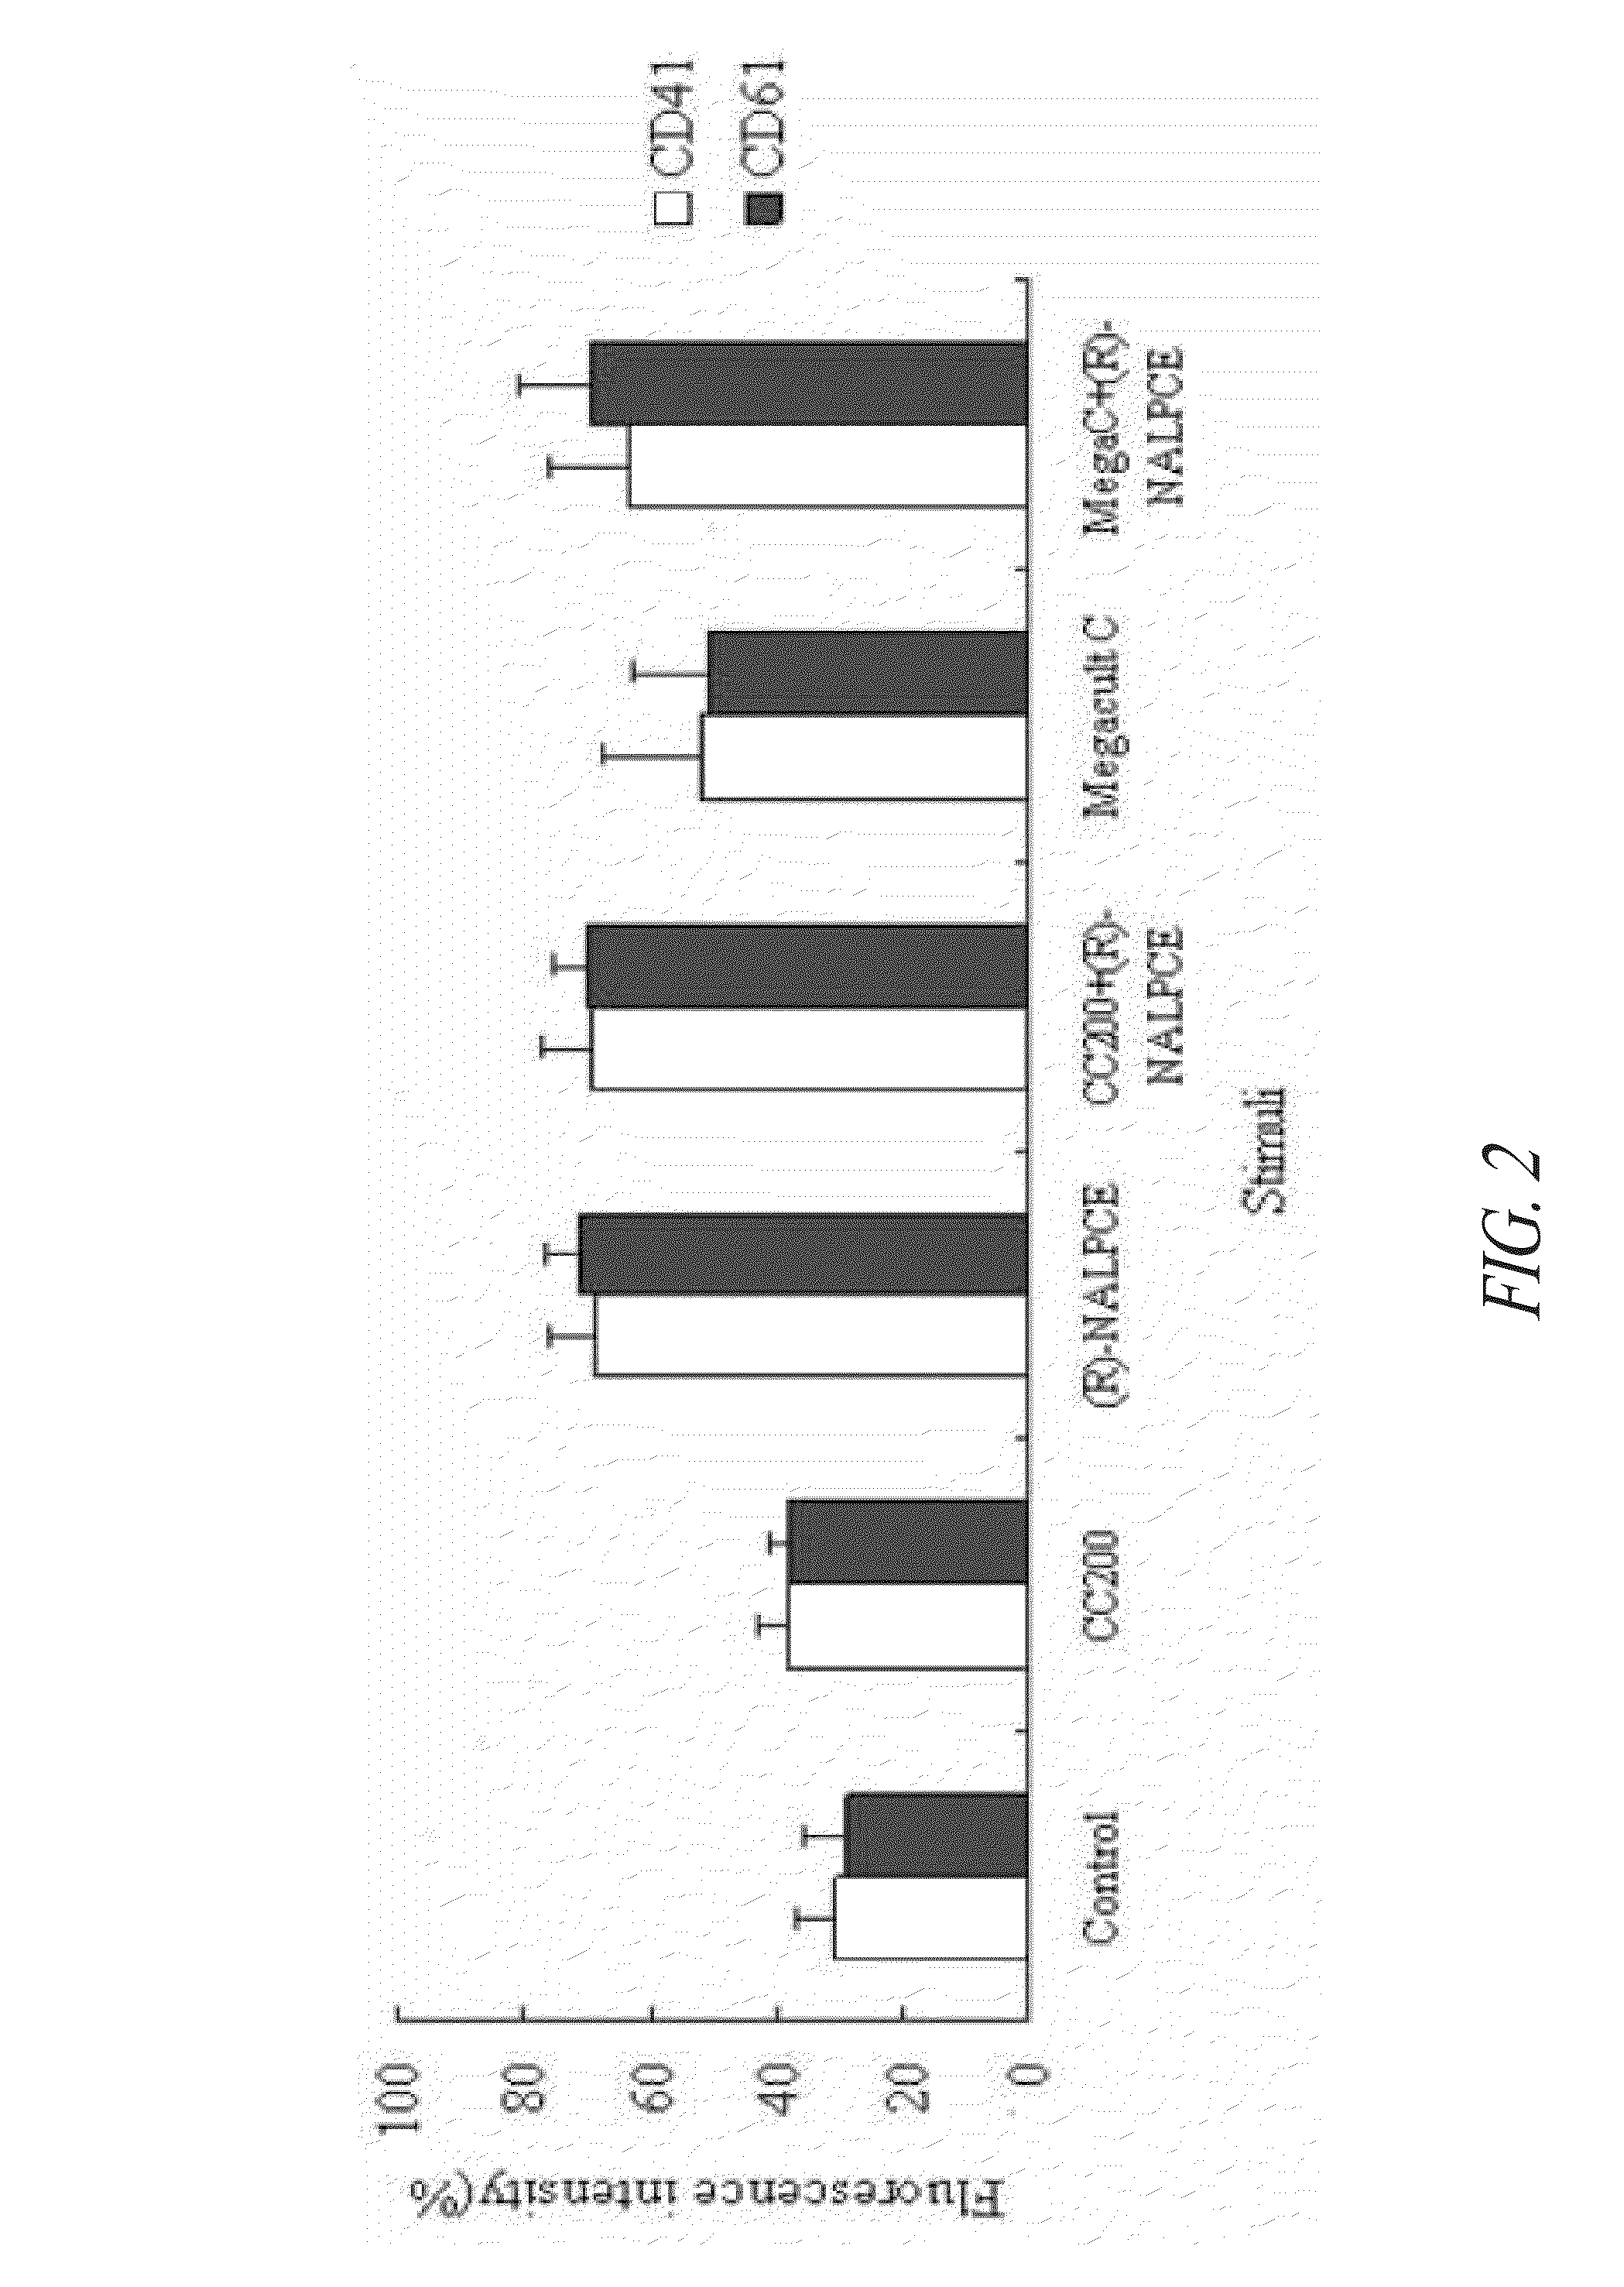 Methods for inducing the differentiation of hematopoietic stem cells into megakaryocytes and platelets, and gene controlling the differentiation